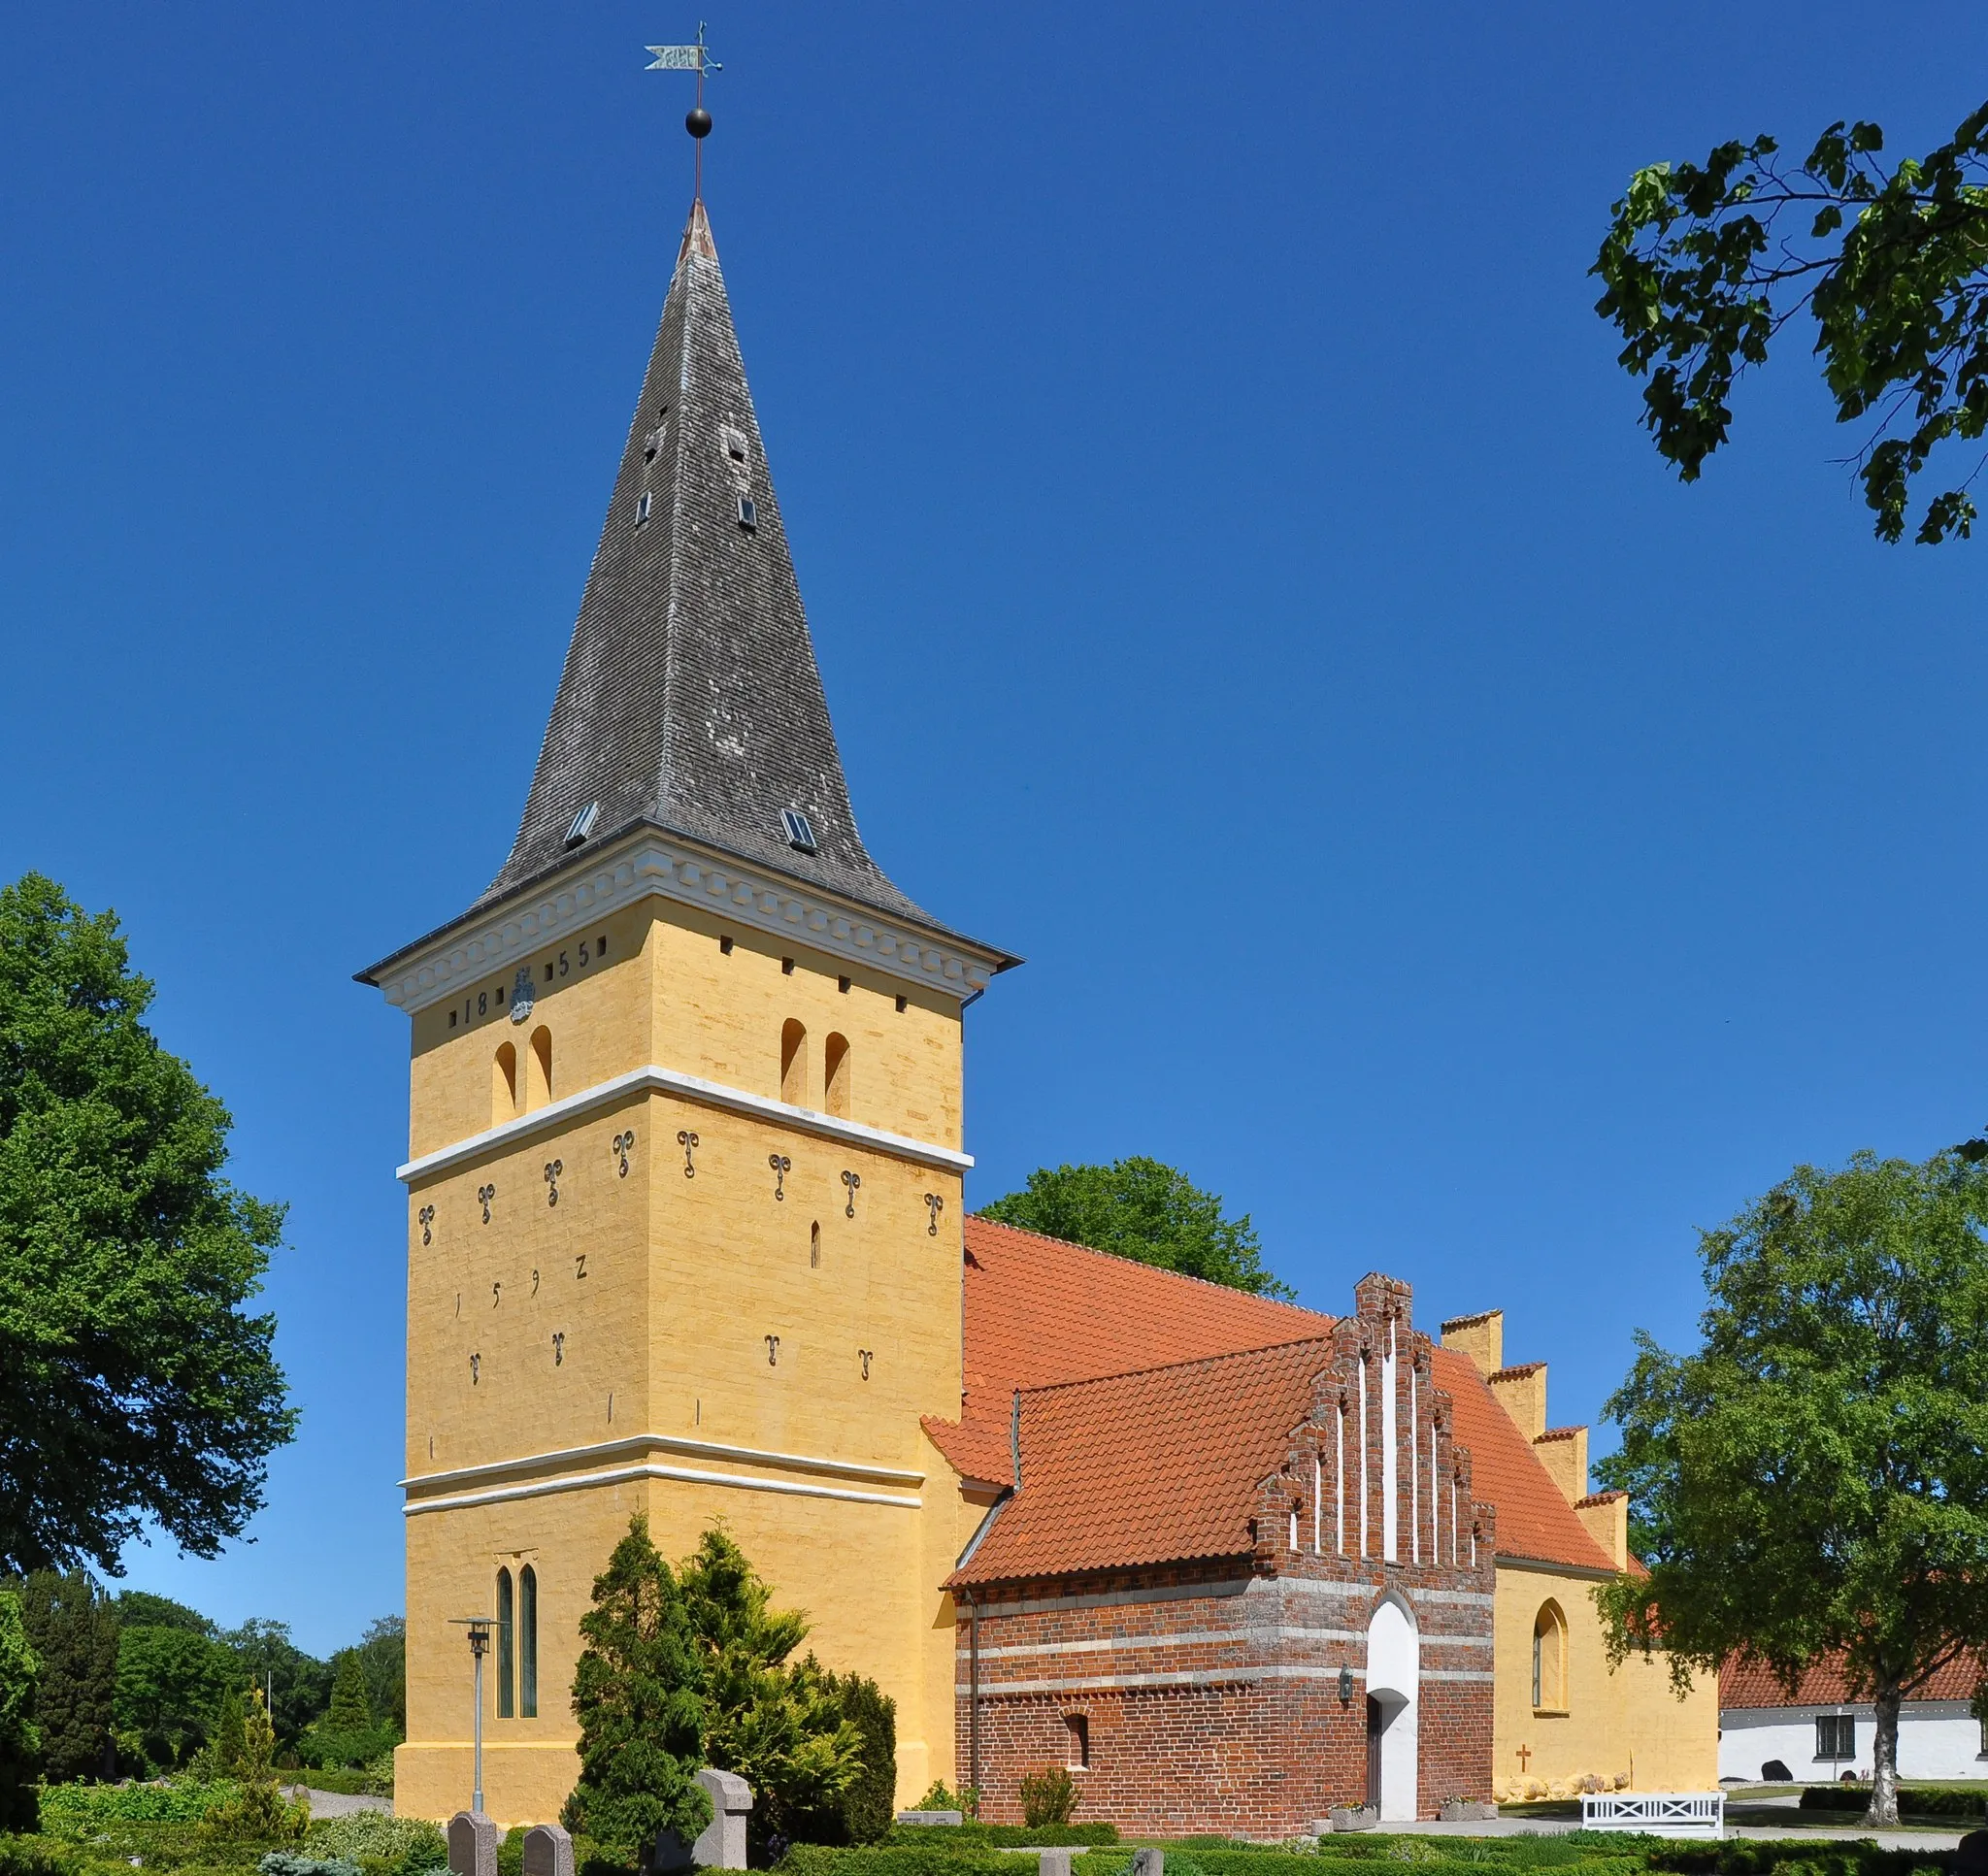 Photo showing: Magleby Church in Stevns Municipality, Denmark.